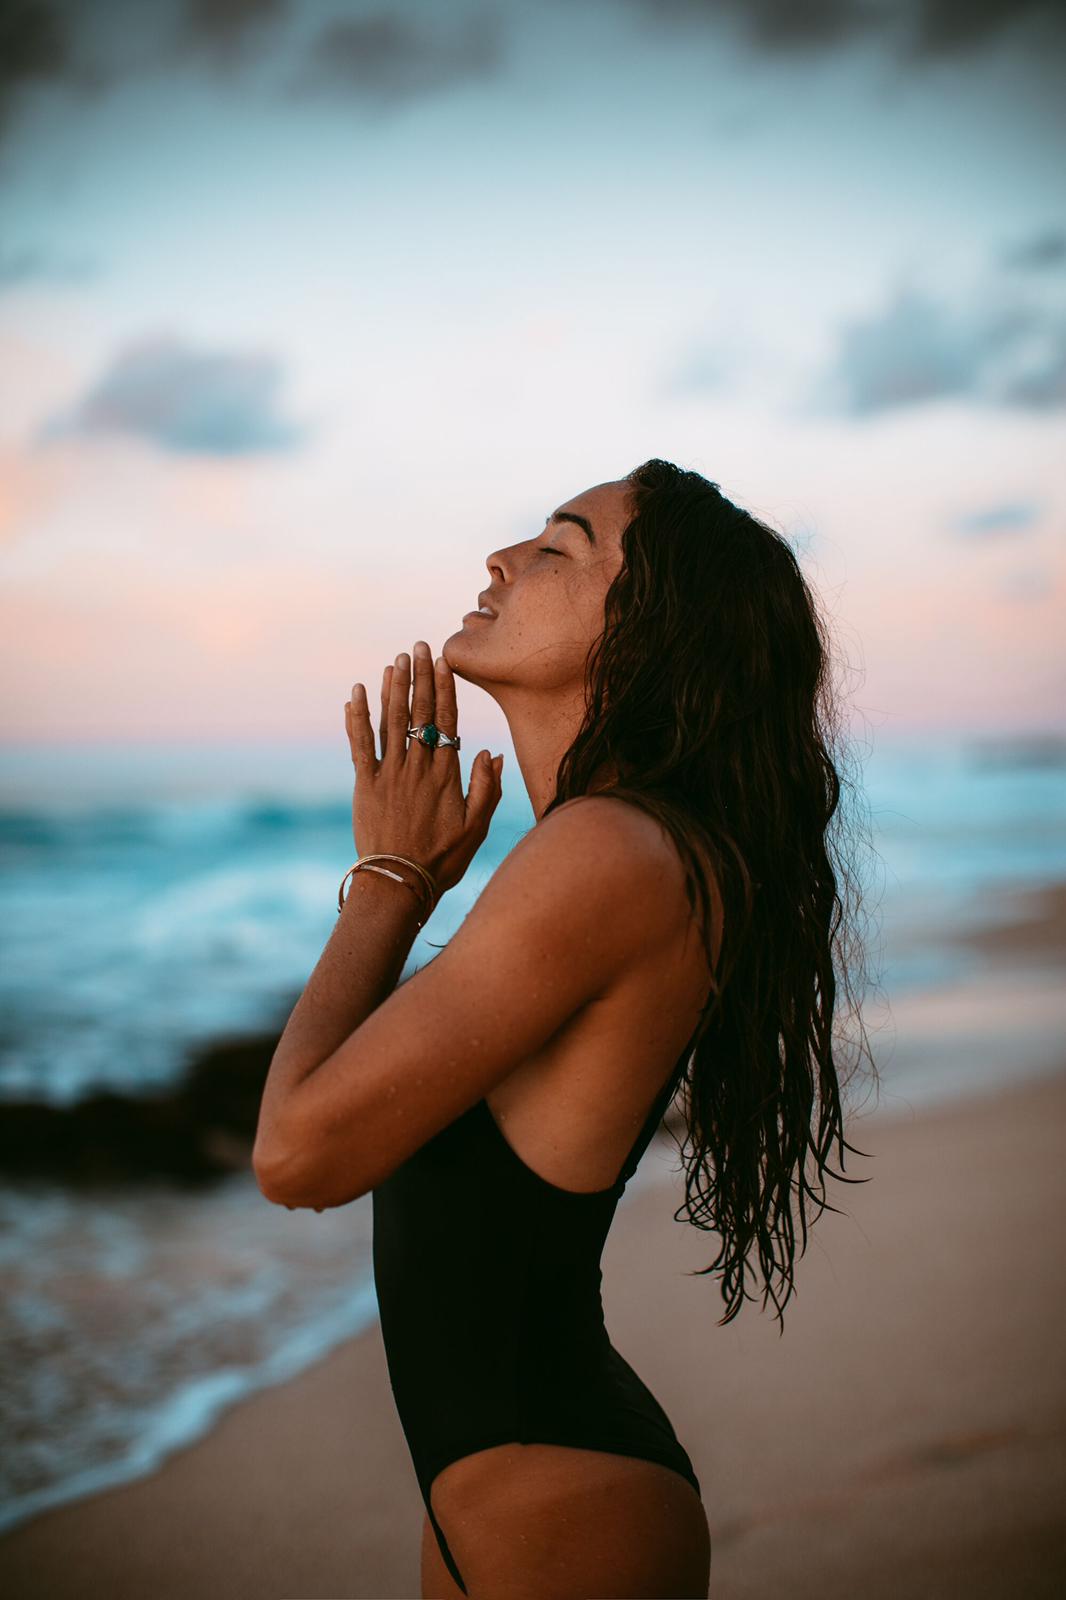 Chelsea Yamase on a beach looking like she's praying to the sky